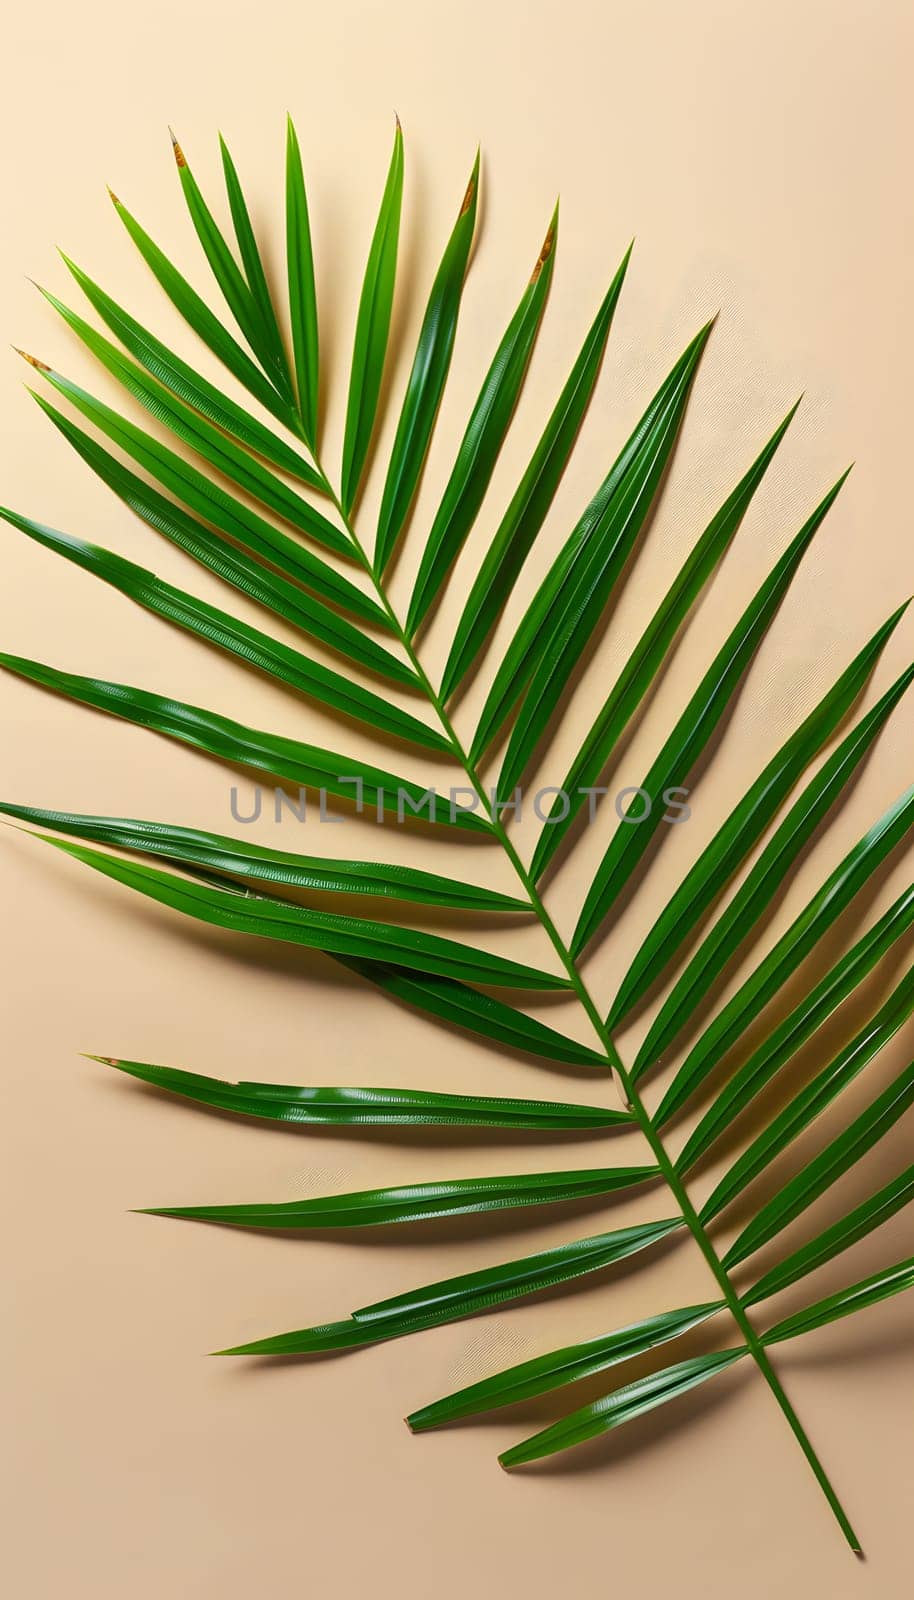 A closeup image of a palm leaf showcasing the intricate patterns of this terrestrial plant. The evergreen twig belongs to the Arecales order, displaying symmetry in its coniferlike structure